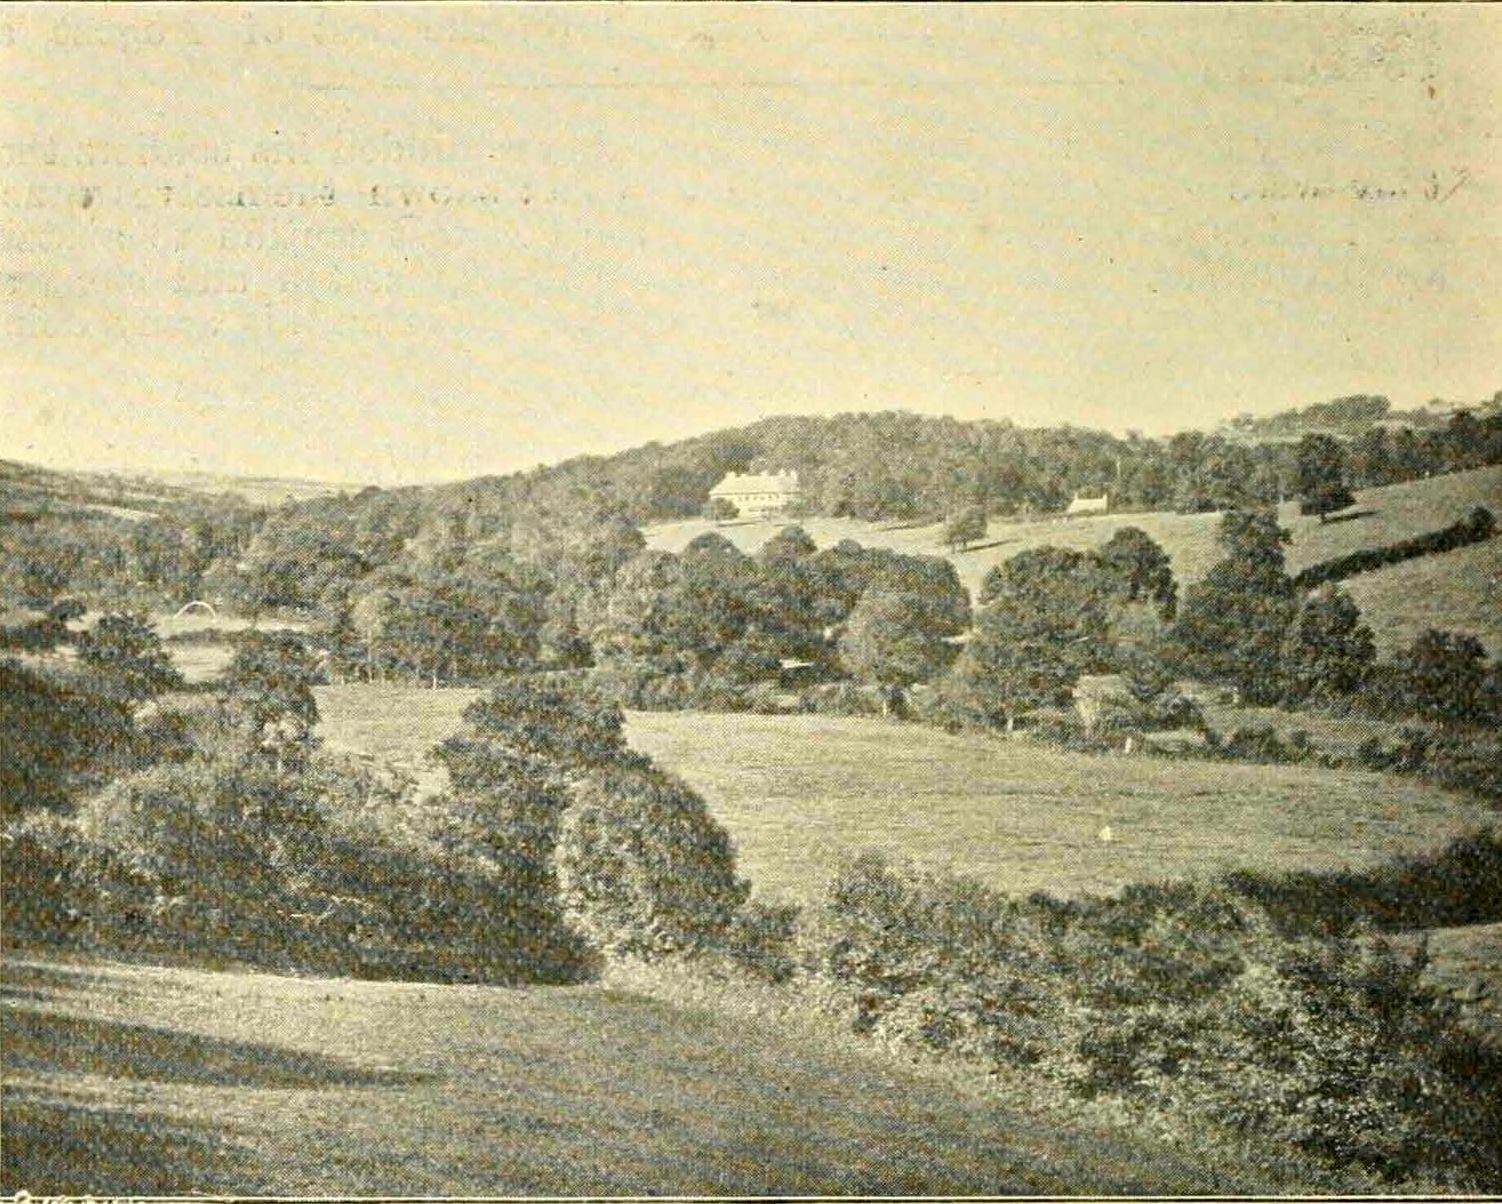 A view of Landue House, Lezant from 1900